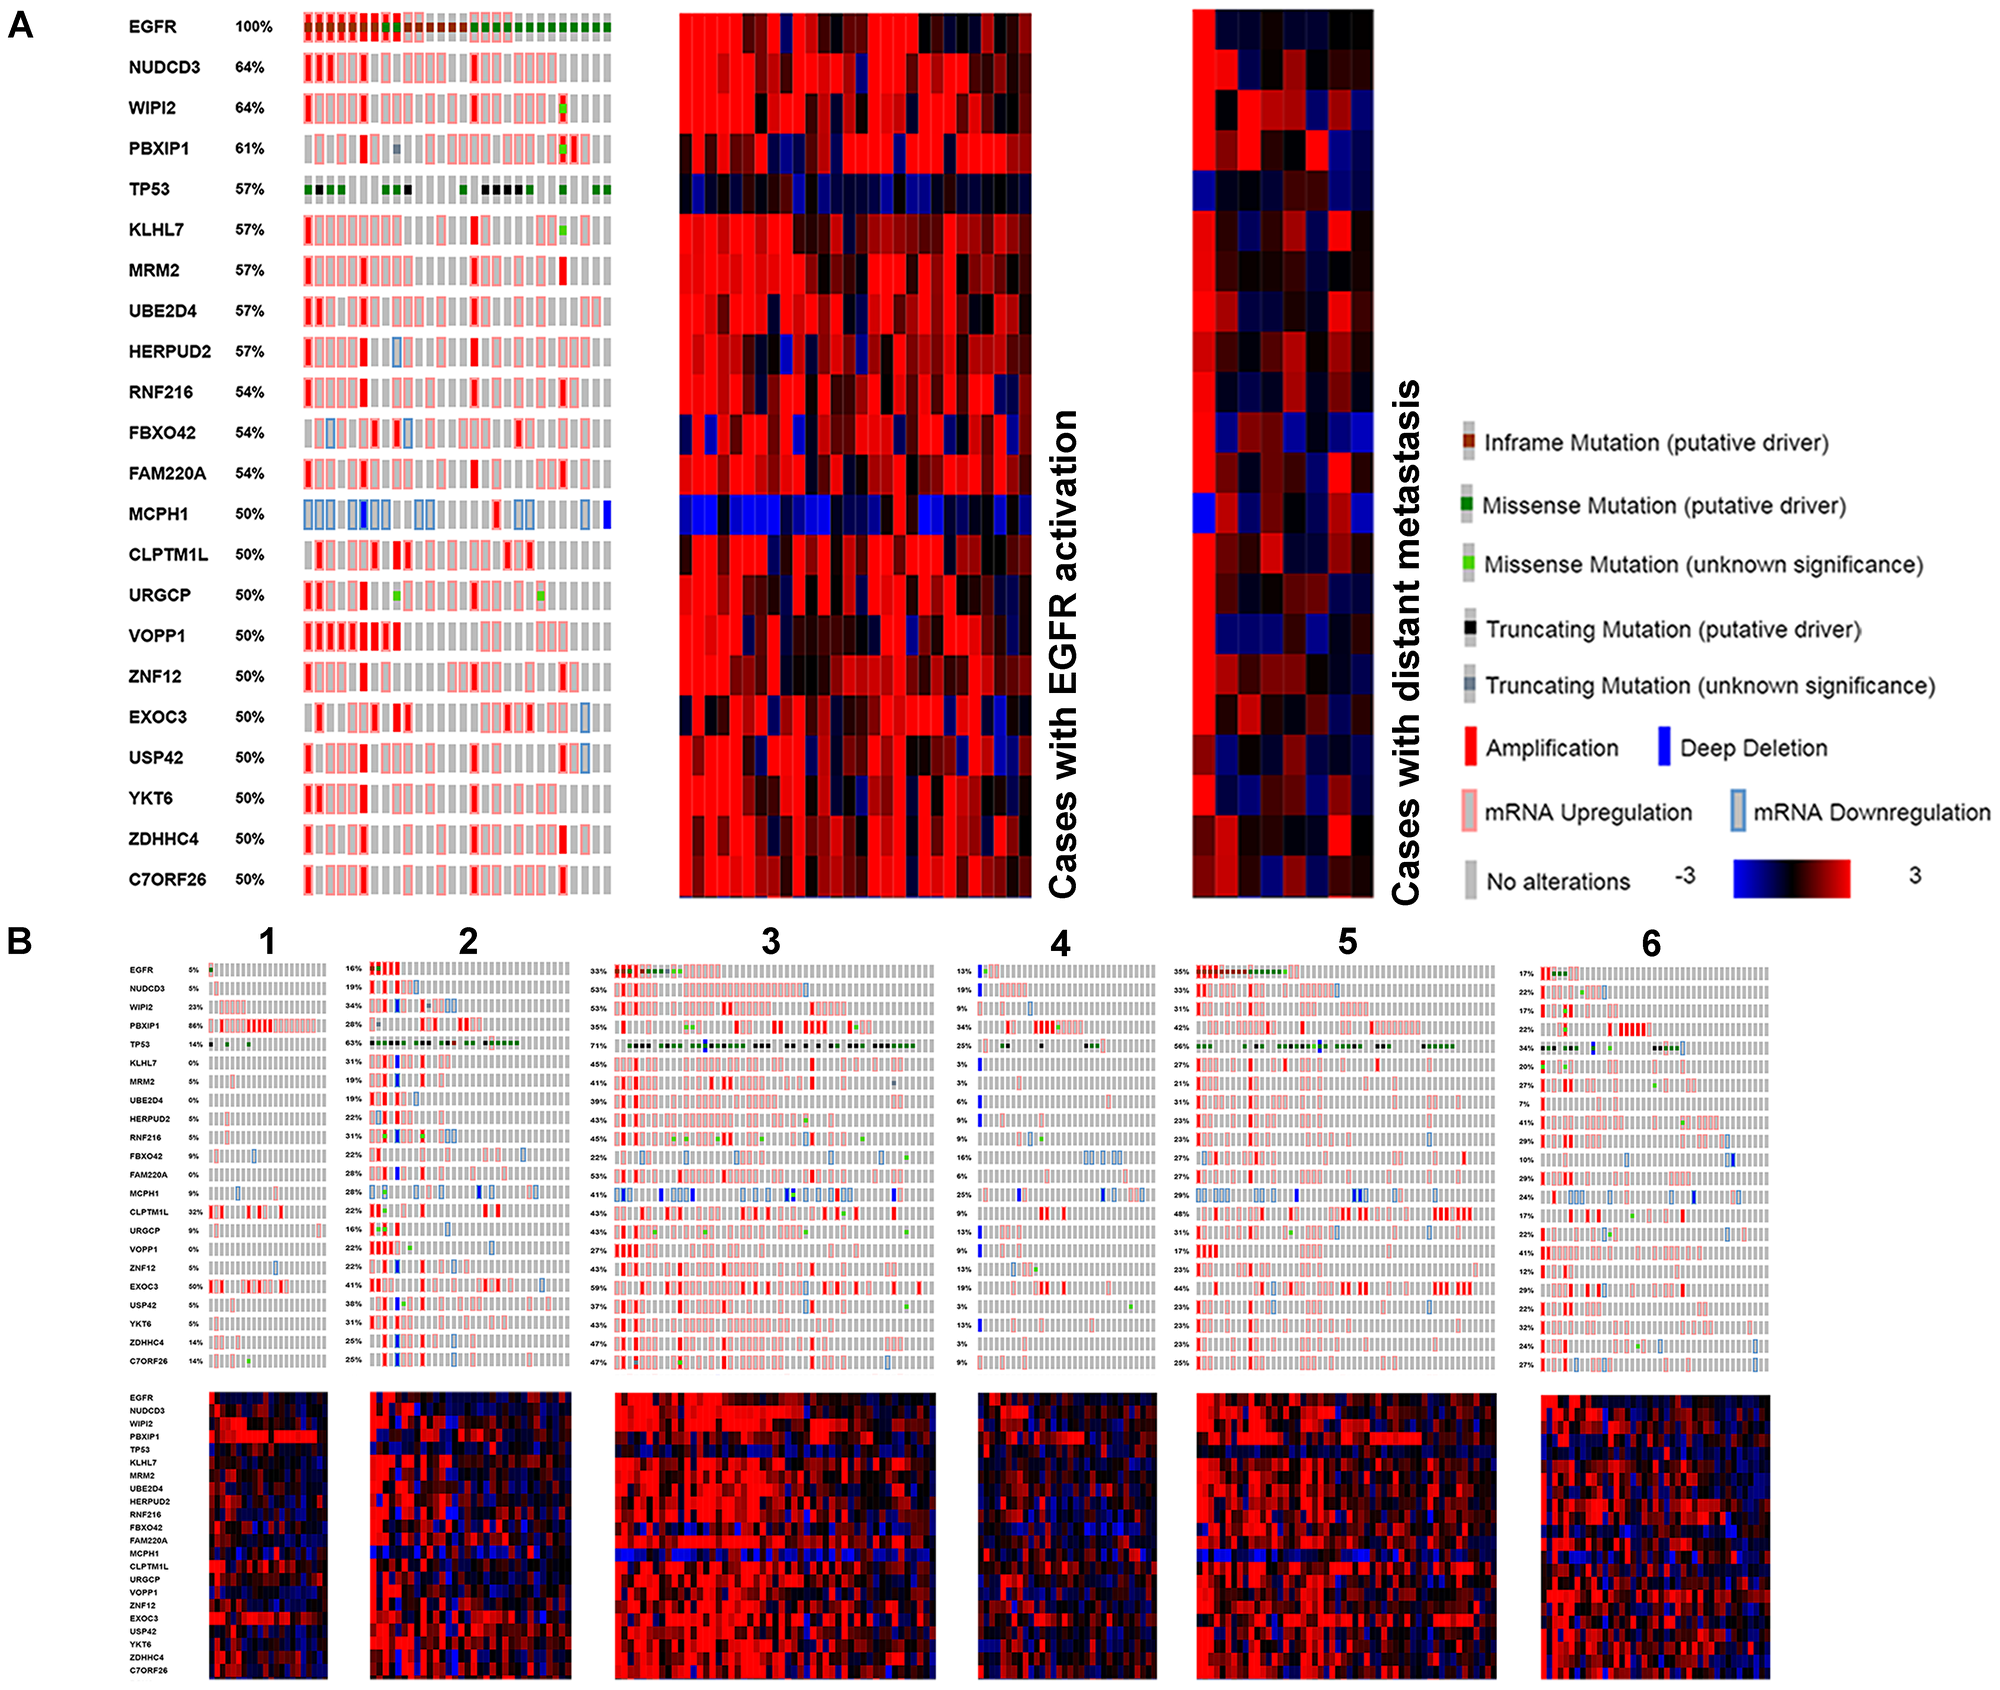 Genes found with genomic and transcriptomic alterations in EGFR activated LUAD, with high frequency.